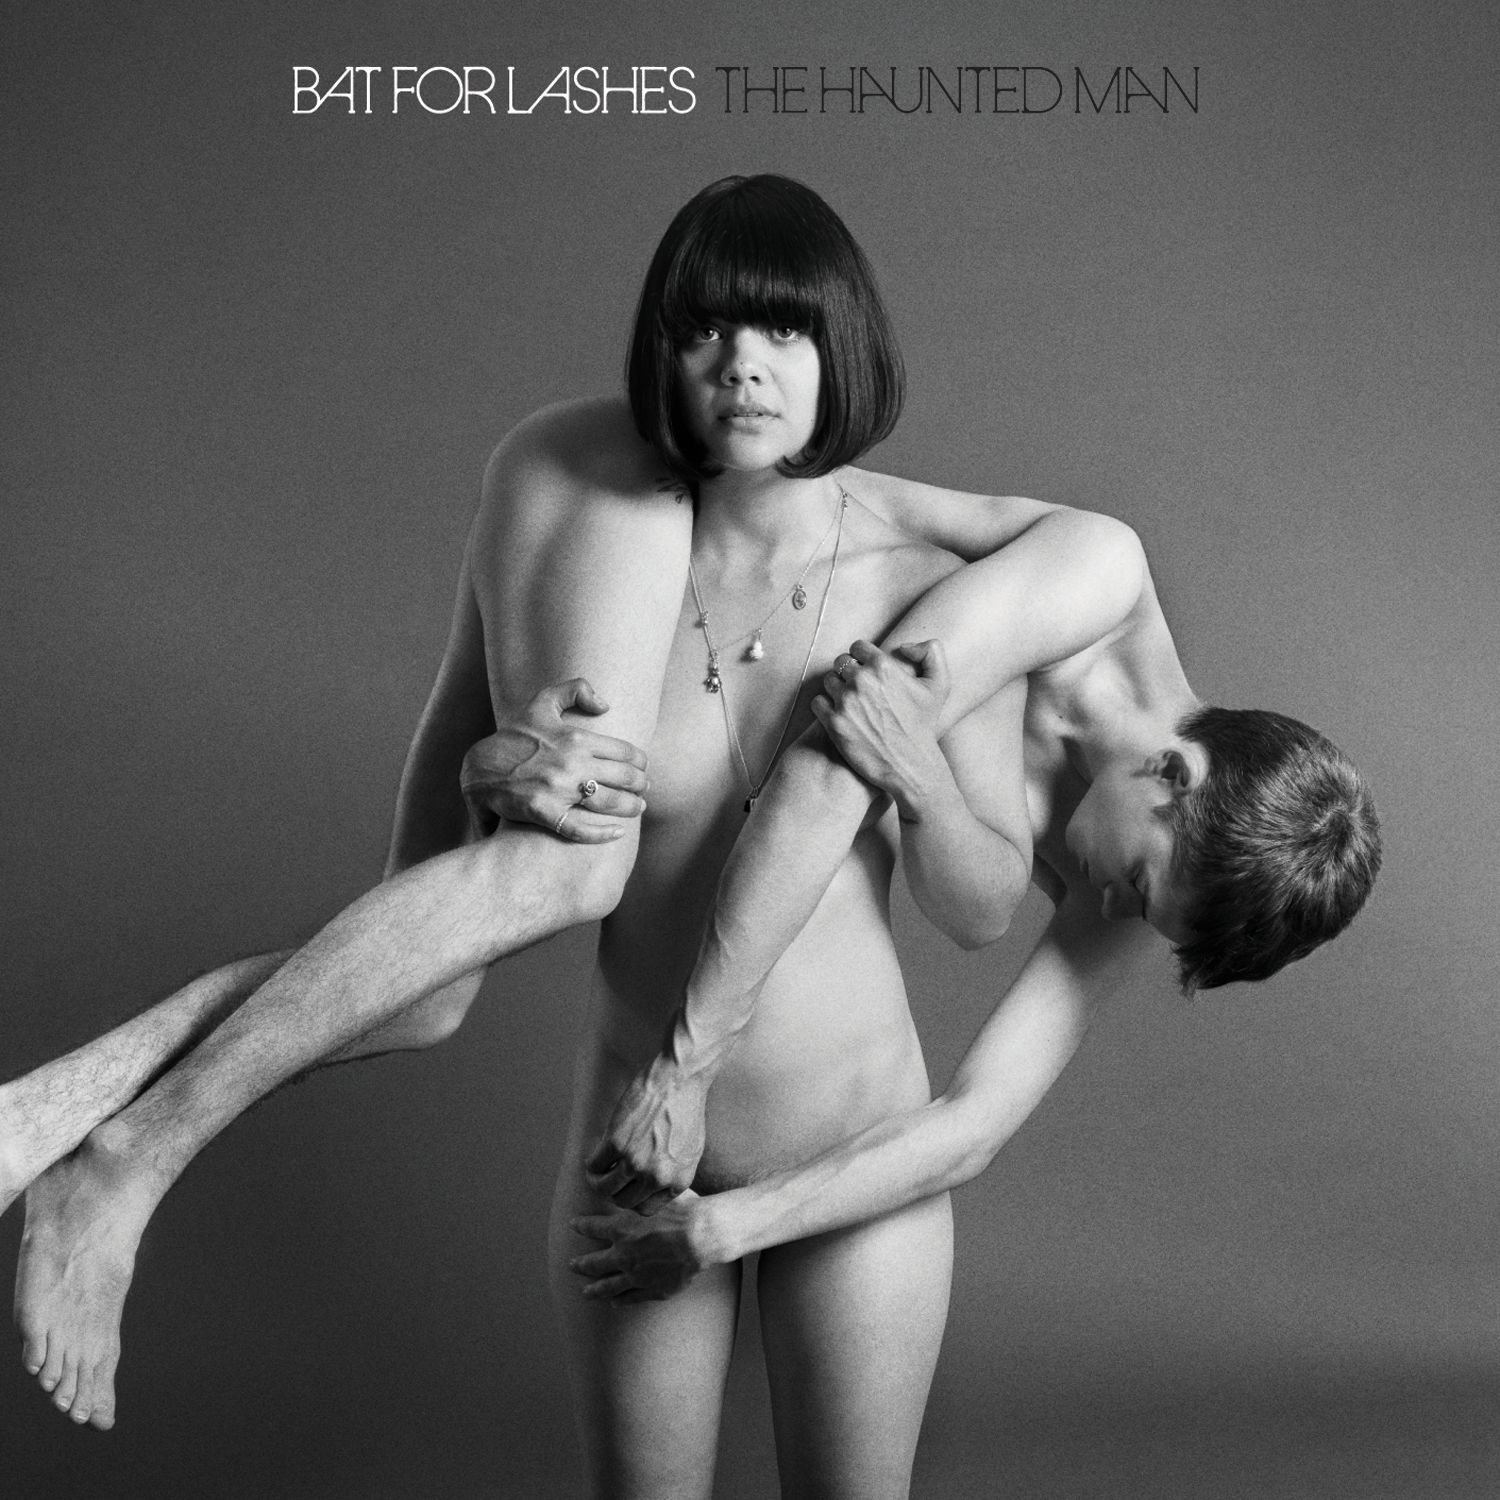 Bat for Lashes The Haunted Man cover artwork